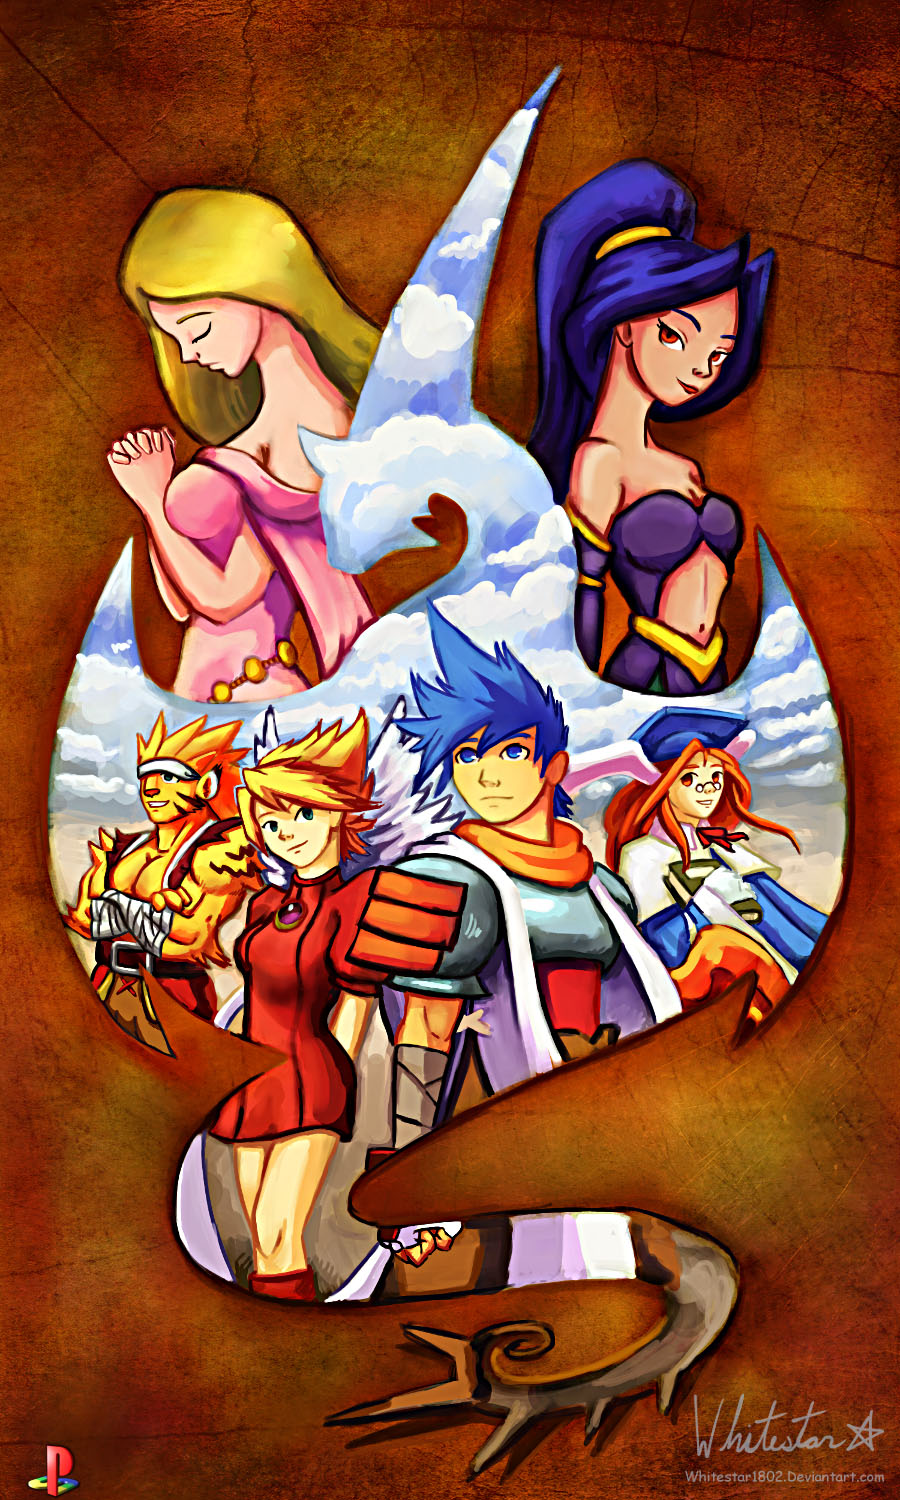 Breath of Fire III Playstation Anniversary Art Tribute on Game-Art-HQ